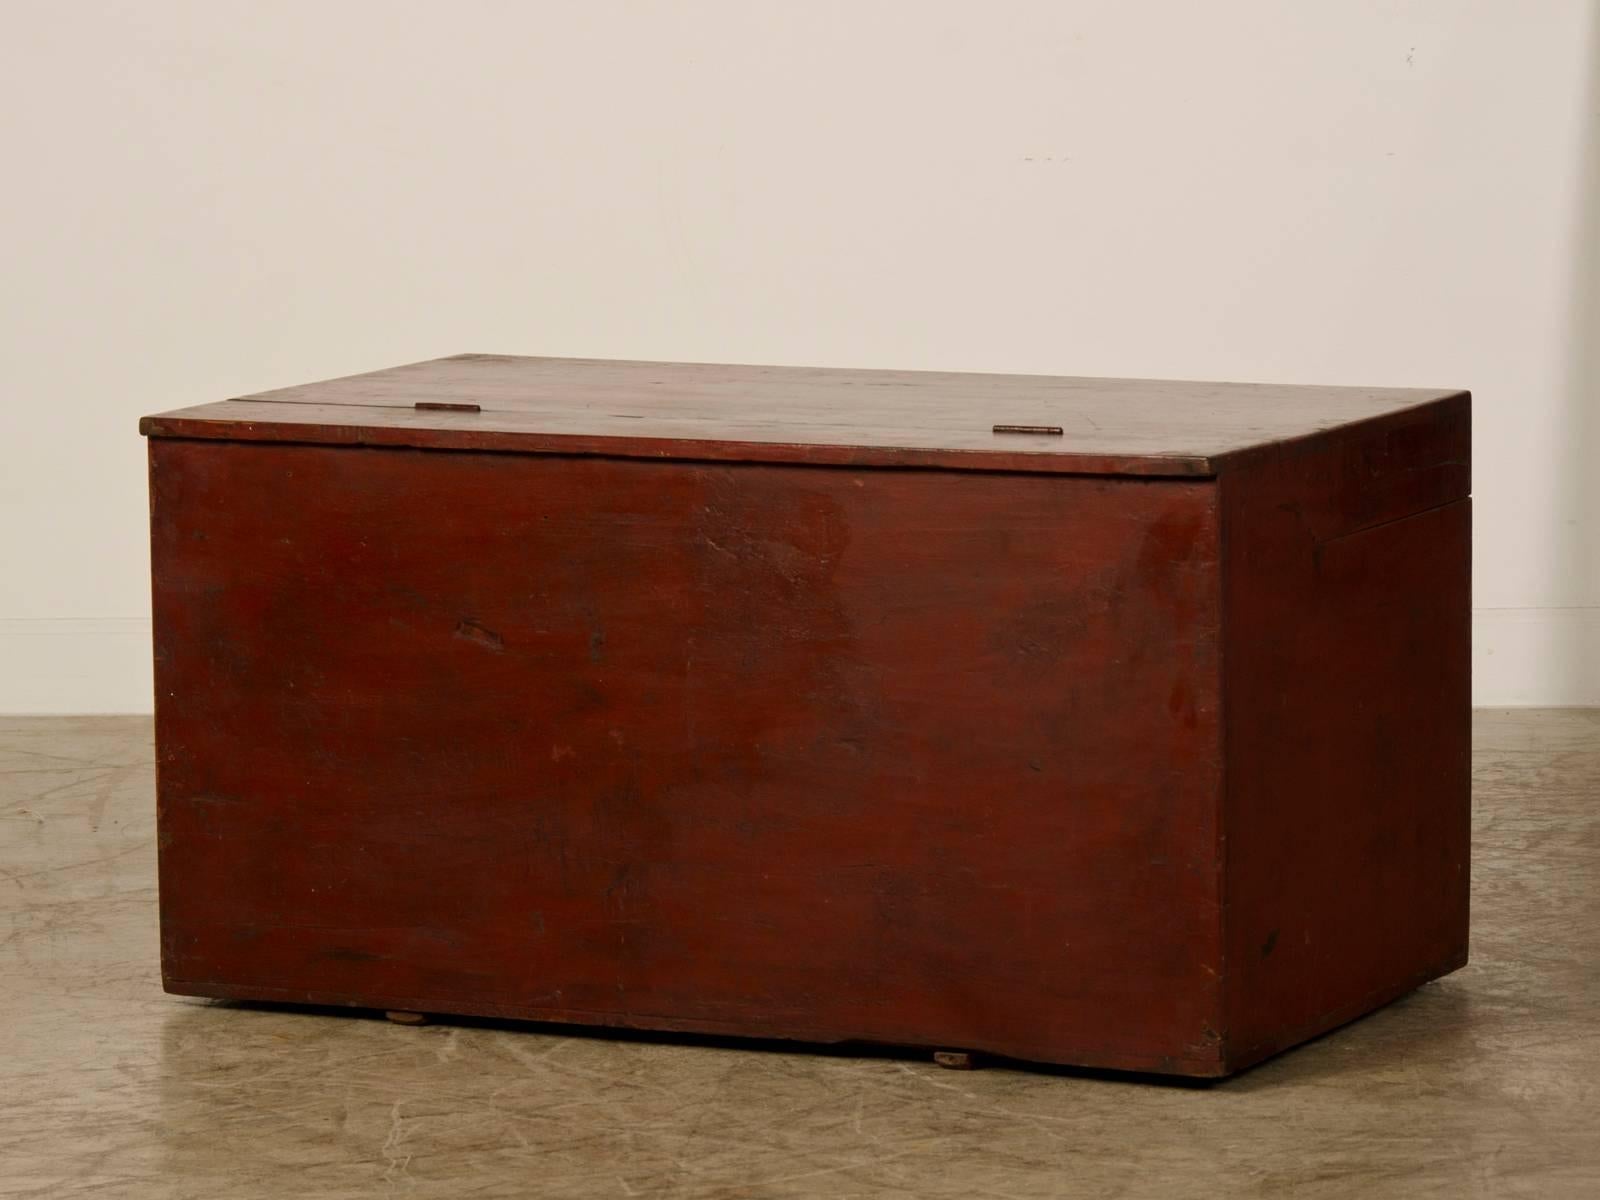 Large Antique Chinese Red Lacquer Trunk Kuang Hsu Period, circa 1875 In Excellent Condition For Sale In Houston, TX